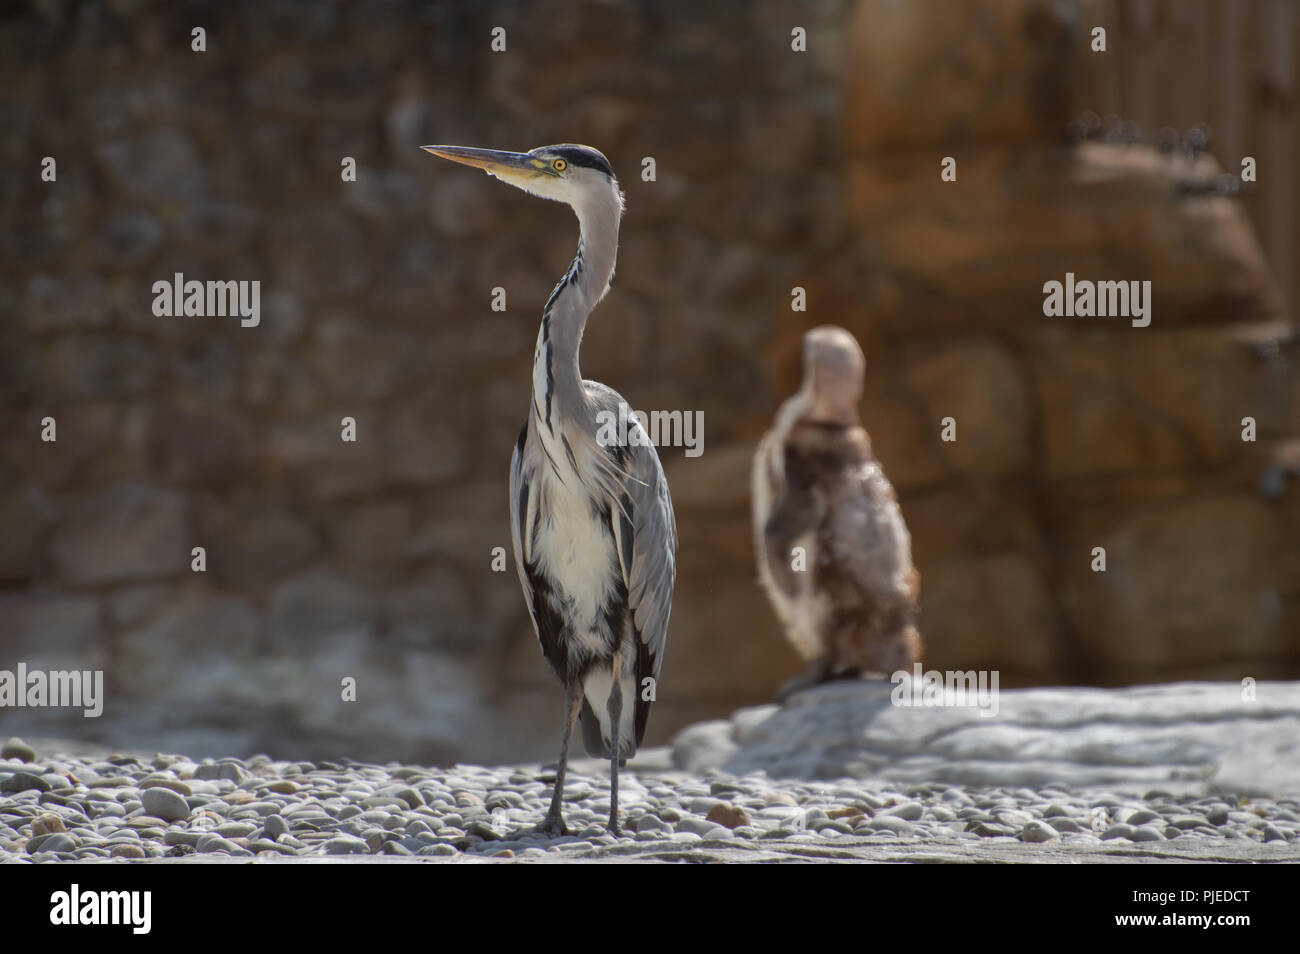 A single Grey Heron has flown in to share the Penguins feeding time at the zoo. Stock Photo